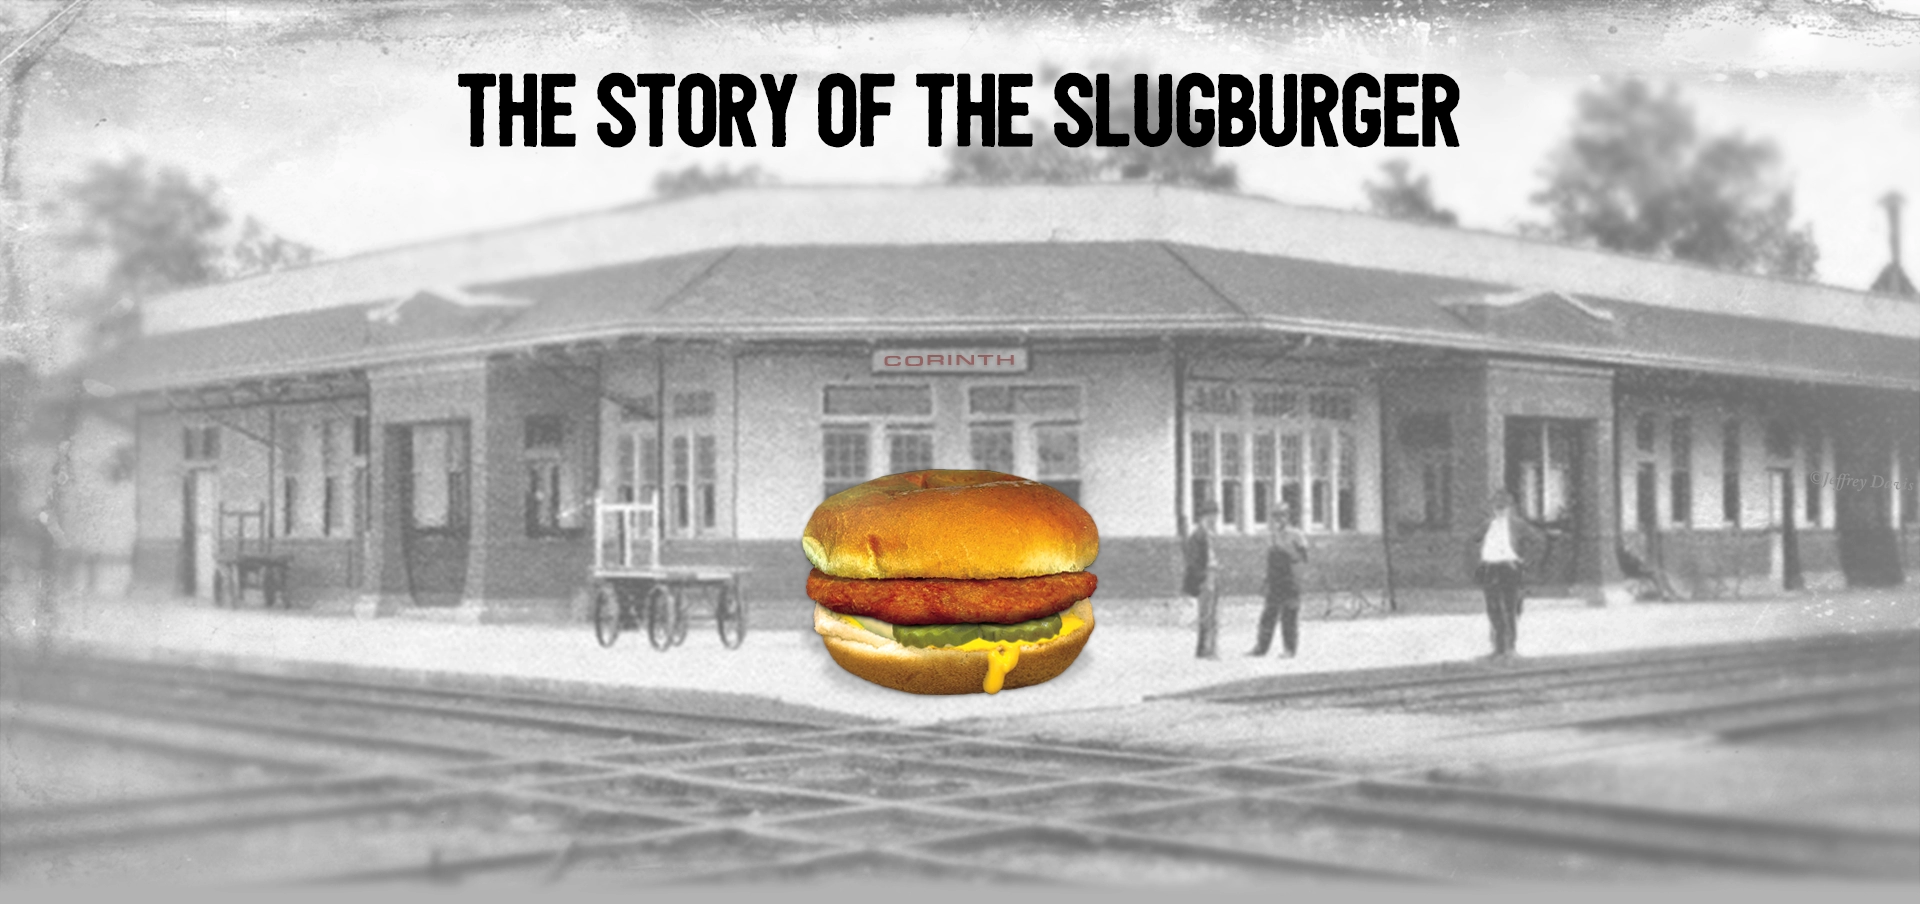 The Story of the Slugburger graphic.